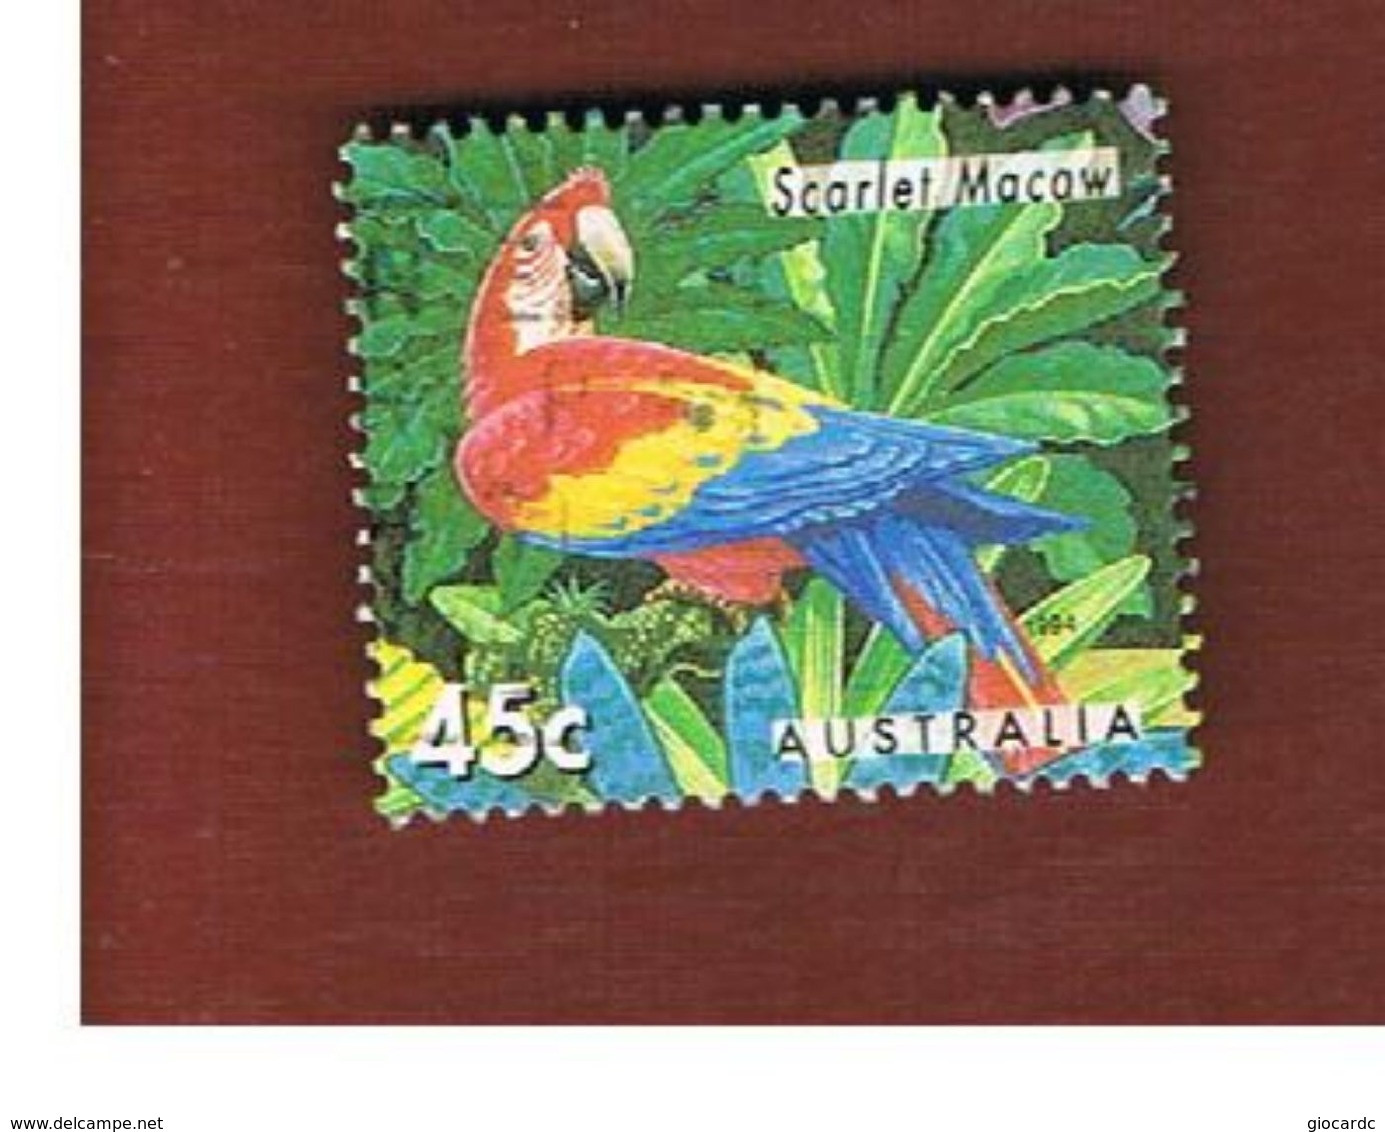 AUSTRALIA  -  SG 1479  -      1994  BIRDS: SCARLET MACAW   -       USED - Used Stamps